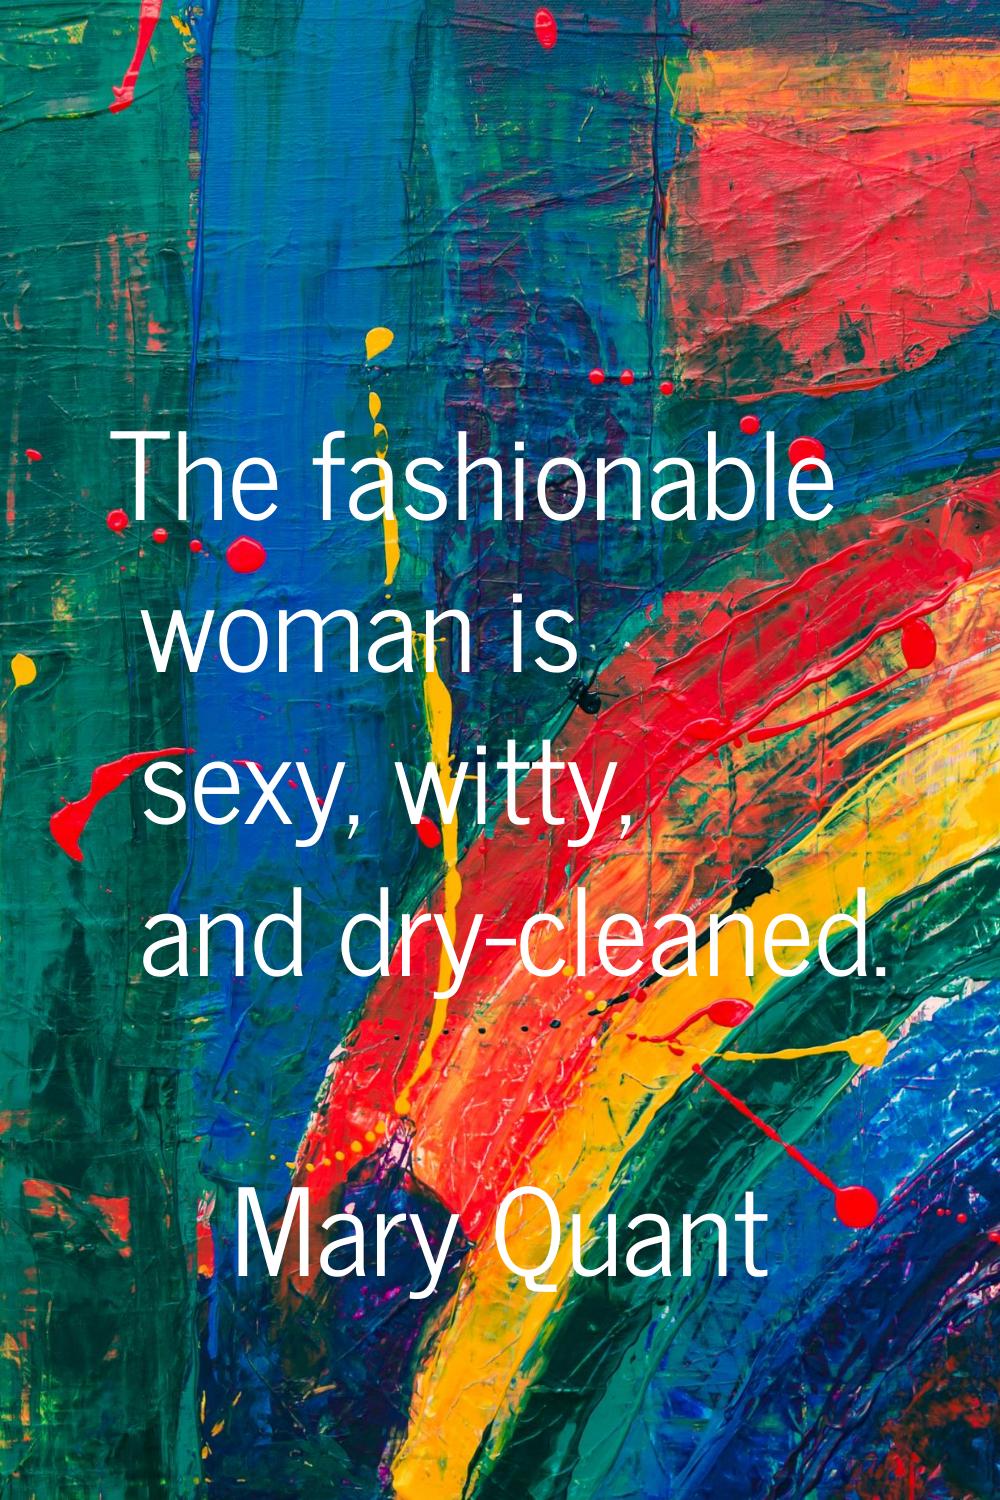 The fashionable woman is sexy, witty, and dry-cleaned.